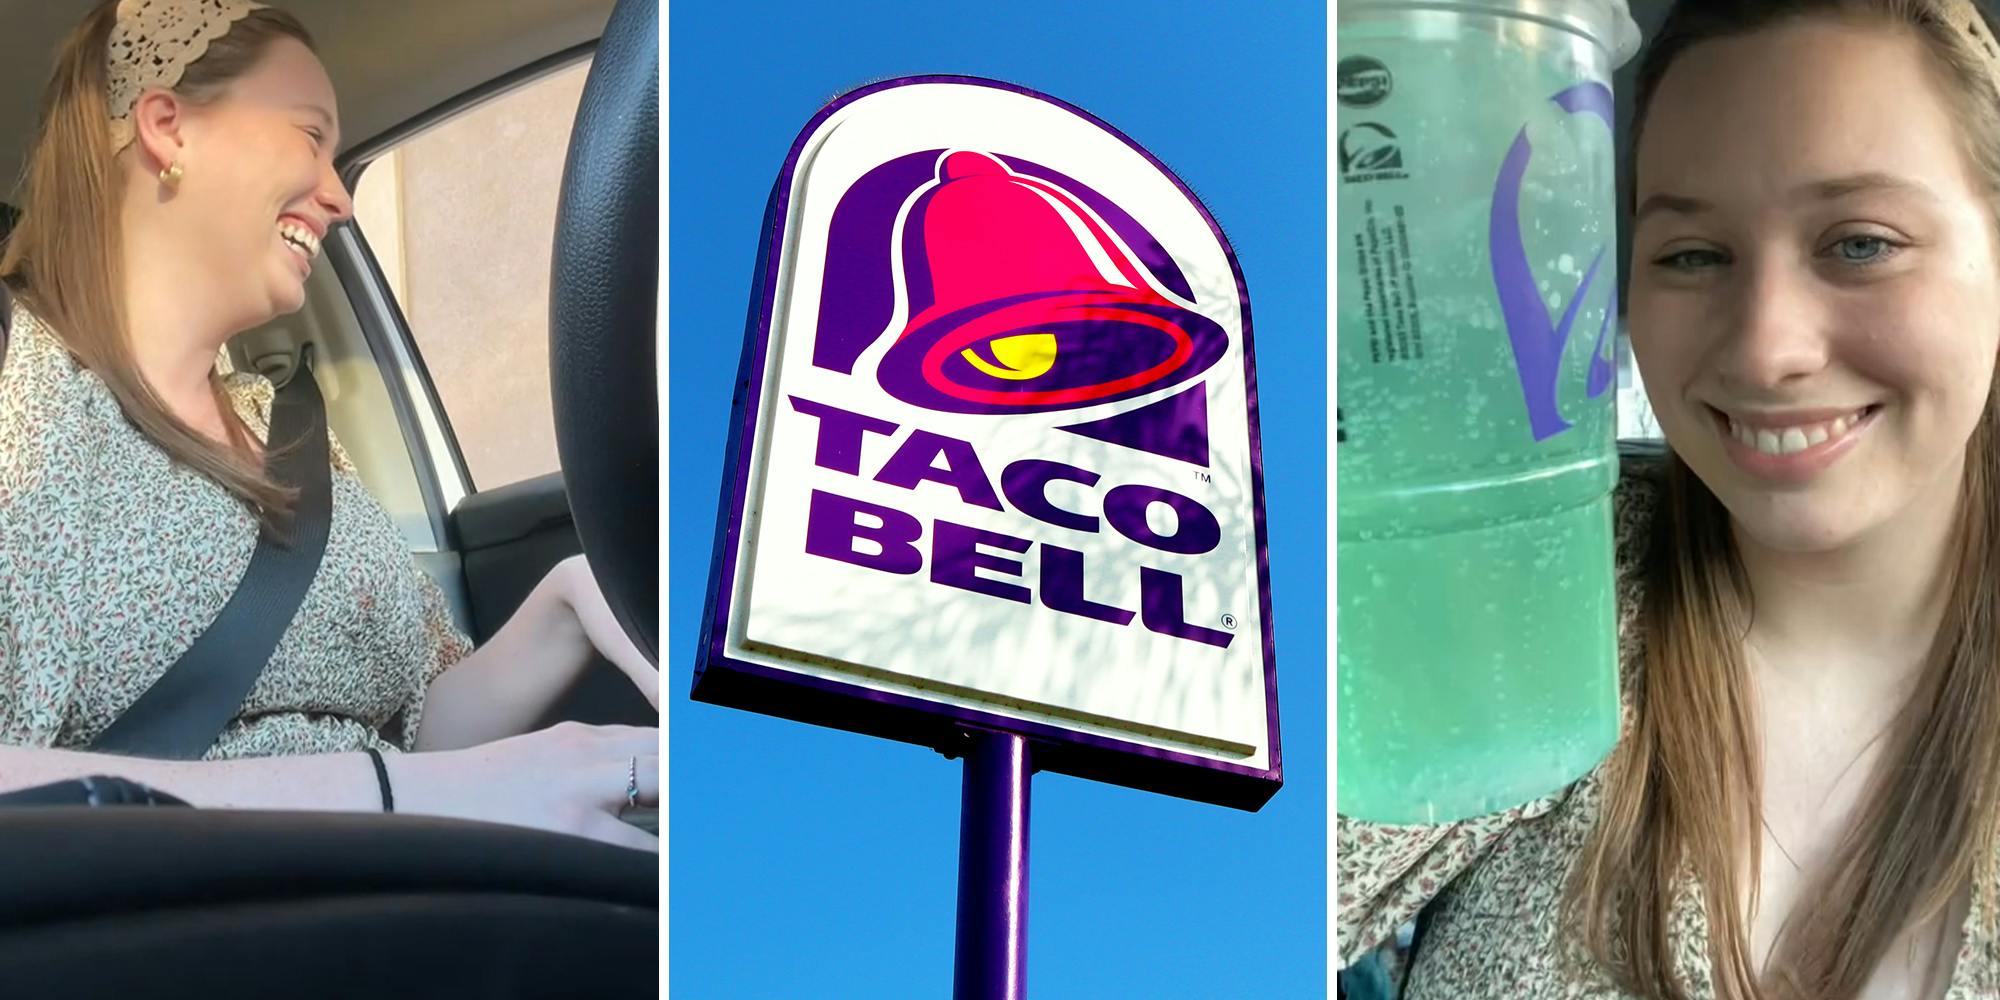 ‘I thought she was being sarcastic’: Taco Bell customer says she was almost charged $28 for a Baja Blast